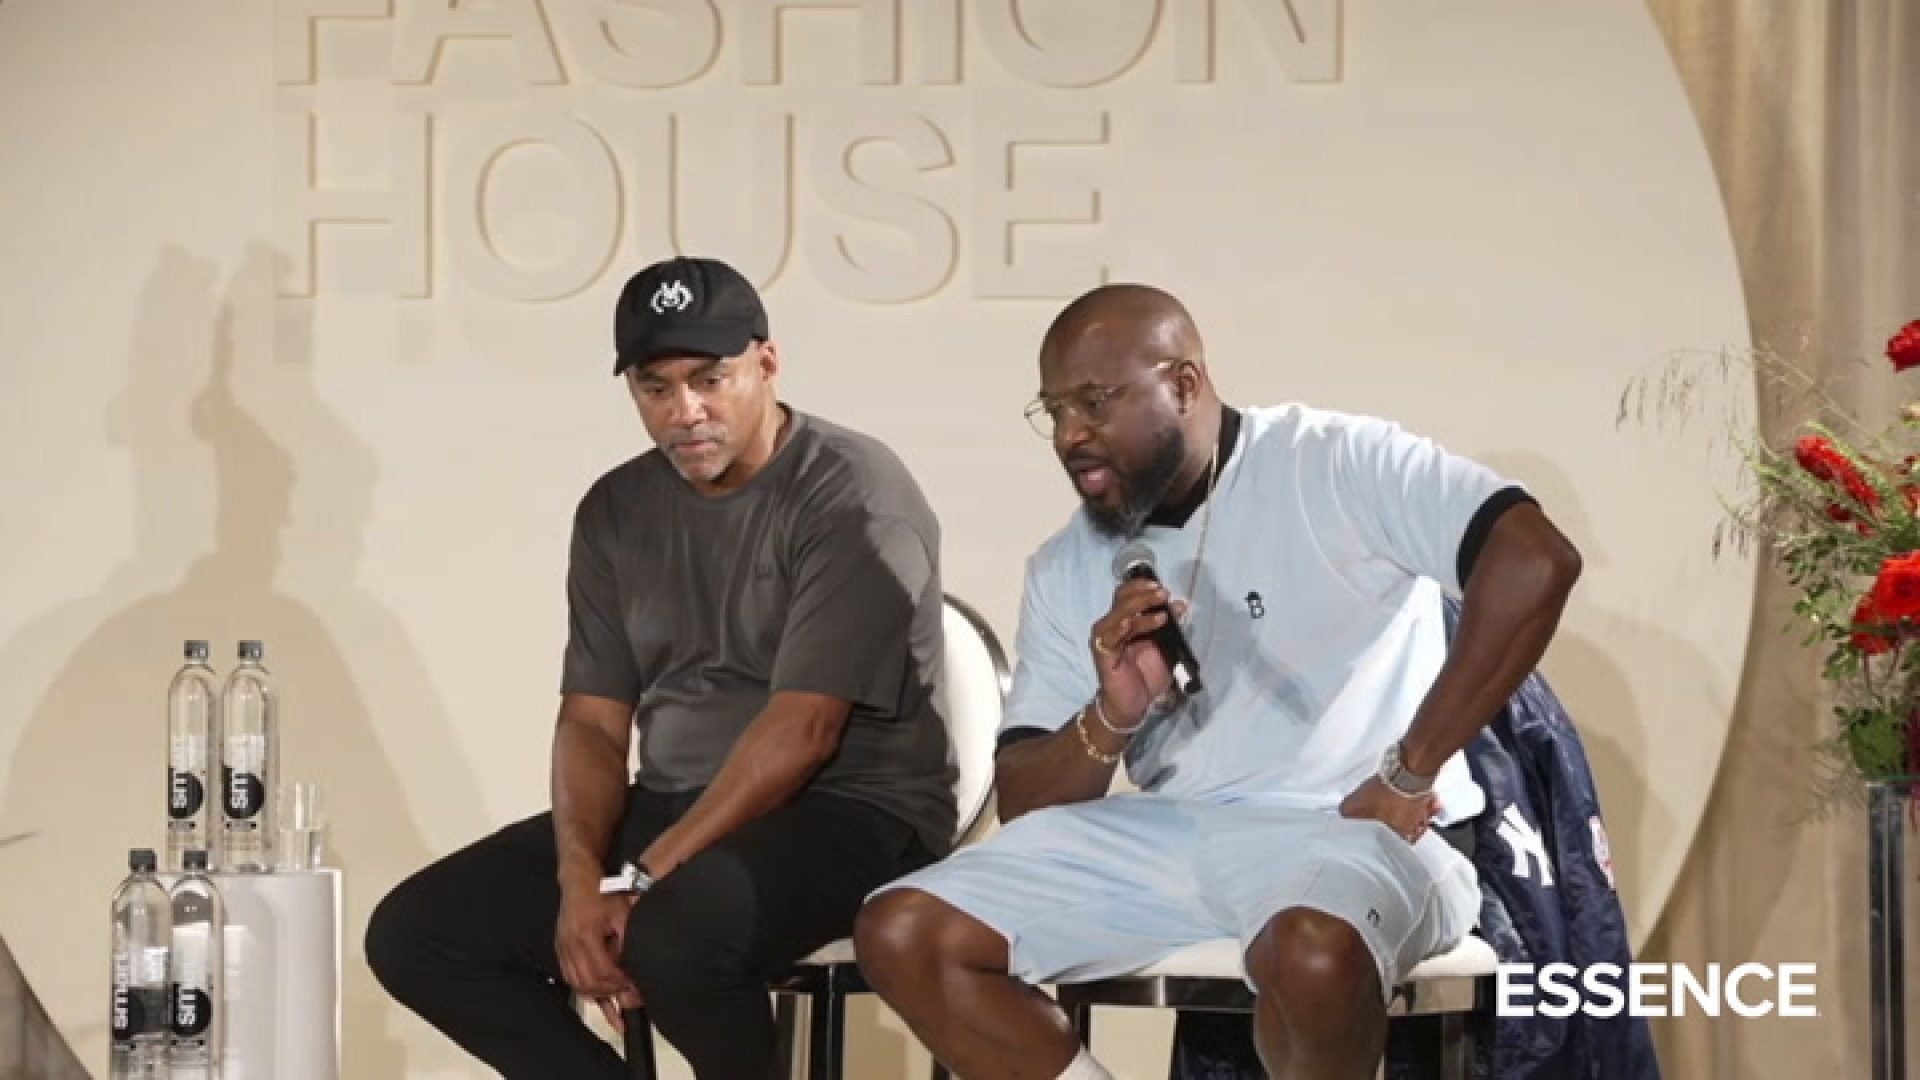 WATCH: FASHION HOUSE: Mike B Talks The Influence Of Black Culture